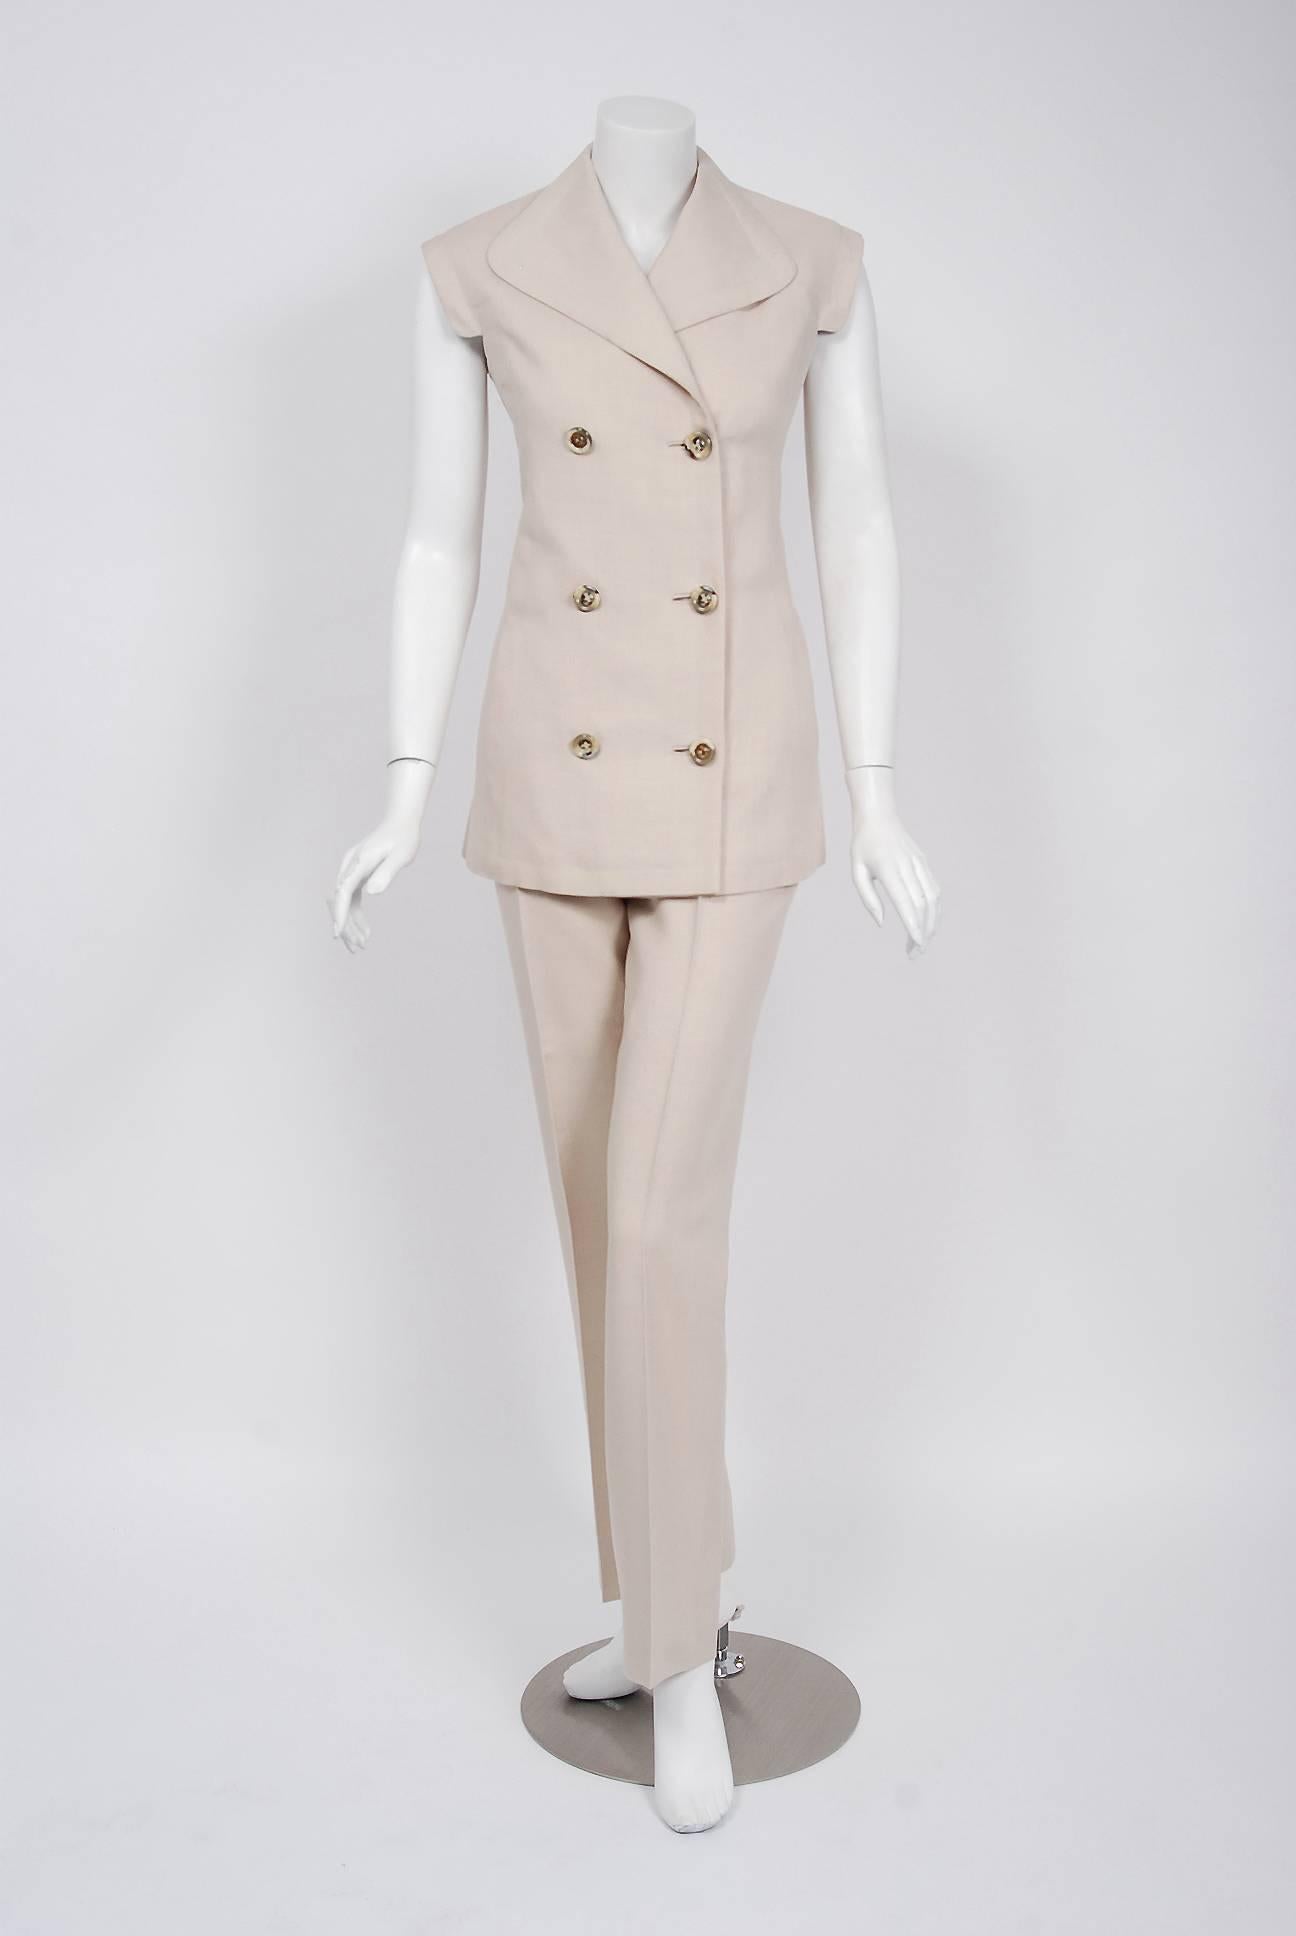 Spectacular Pierre Cardin oatmeal linen pantsuit from his 1968 collection. In 1951 Cardin opened his own couture house and by 1957, he started a ready-to-wear line; a bold move for a French couturier at the time. The look most associated with Cardin